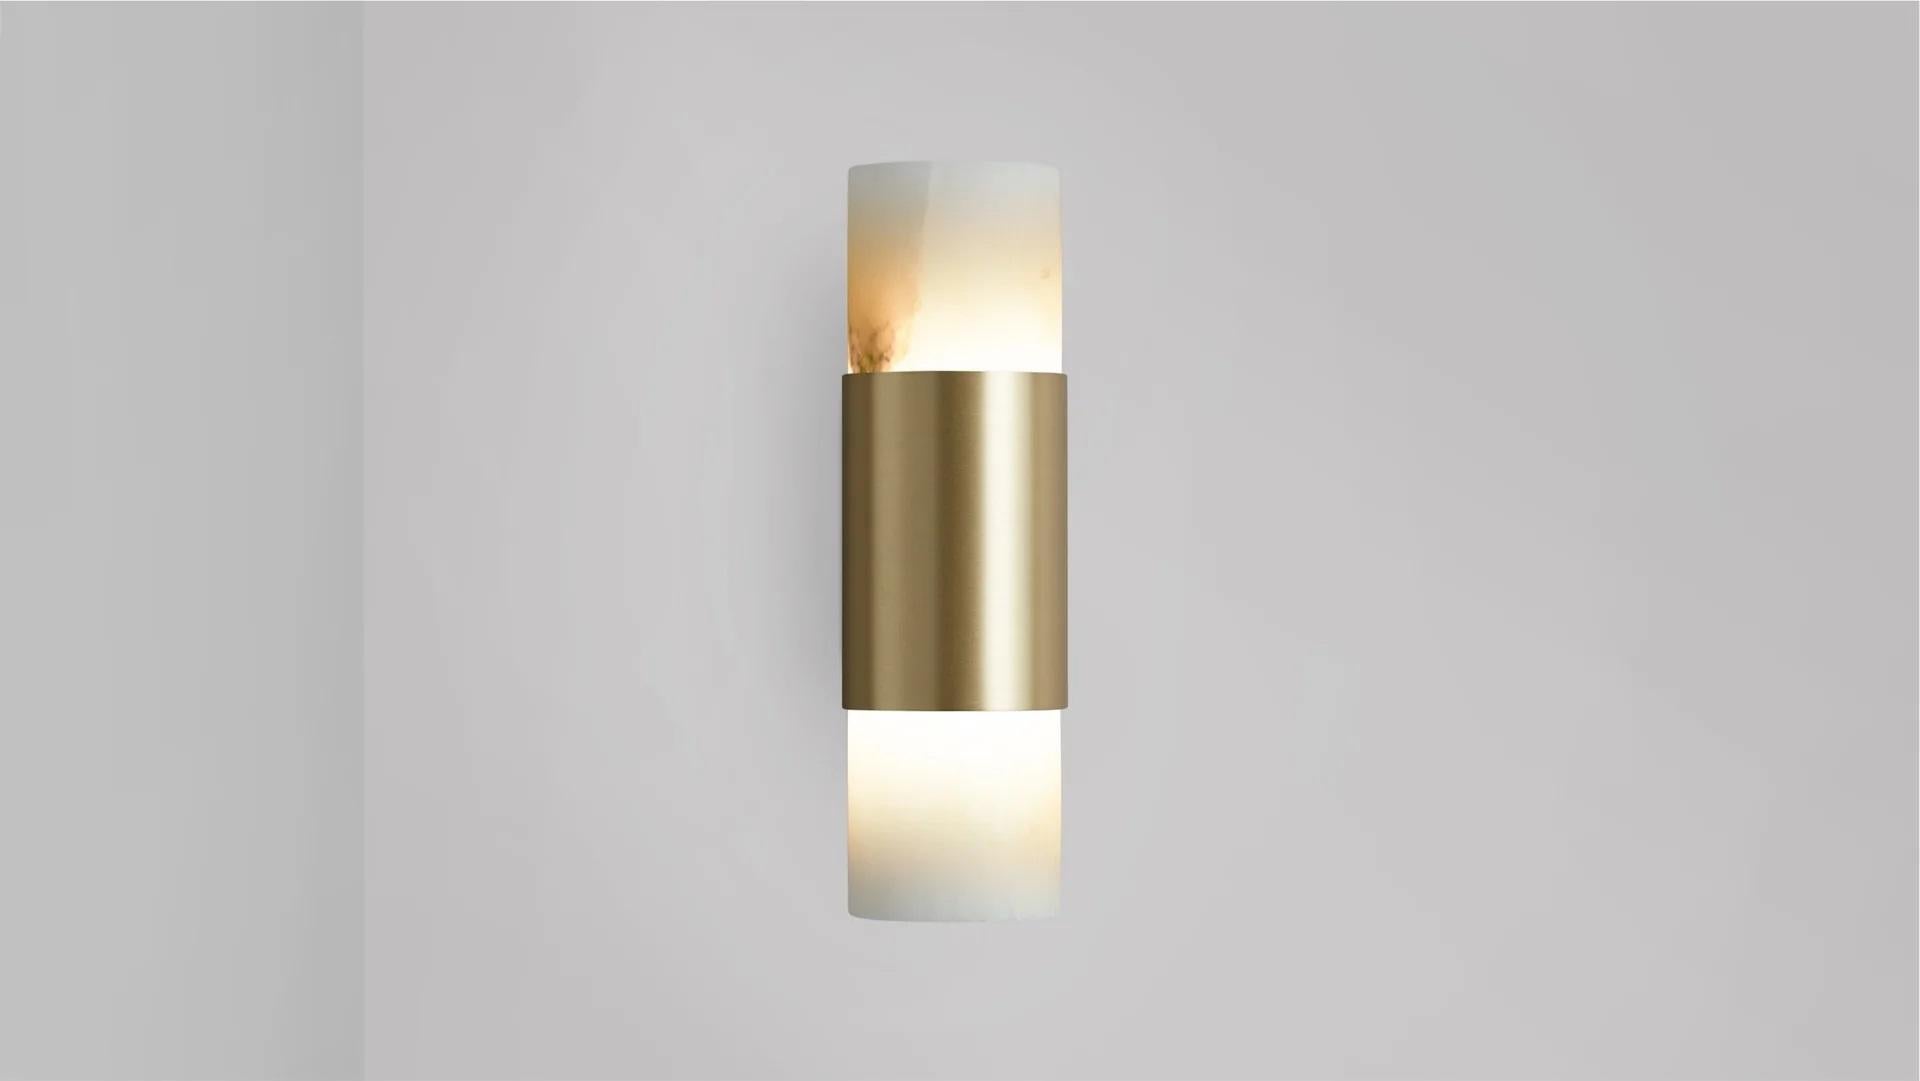 Roma wall lamp by CTO Lighting
Materials: satin brass, alabaster.
Dimensions: D 8.5 x W 5.5 x H 19 cm
Available in satin brass and bronze.

Celebrating the simplicity of line and form, The Roma collection is designed to highlight the noble quality